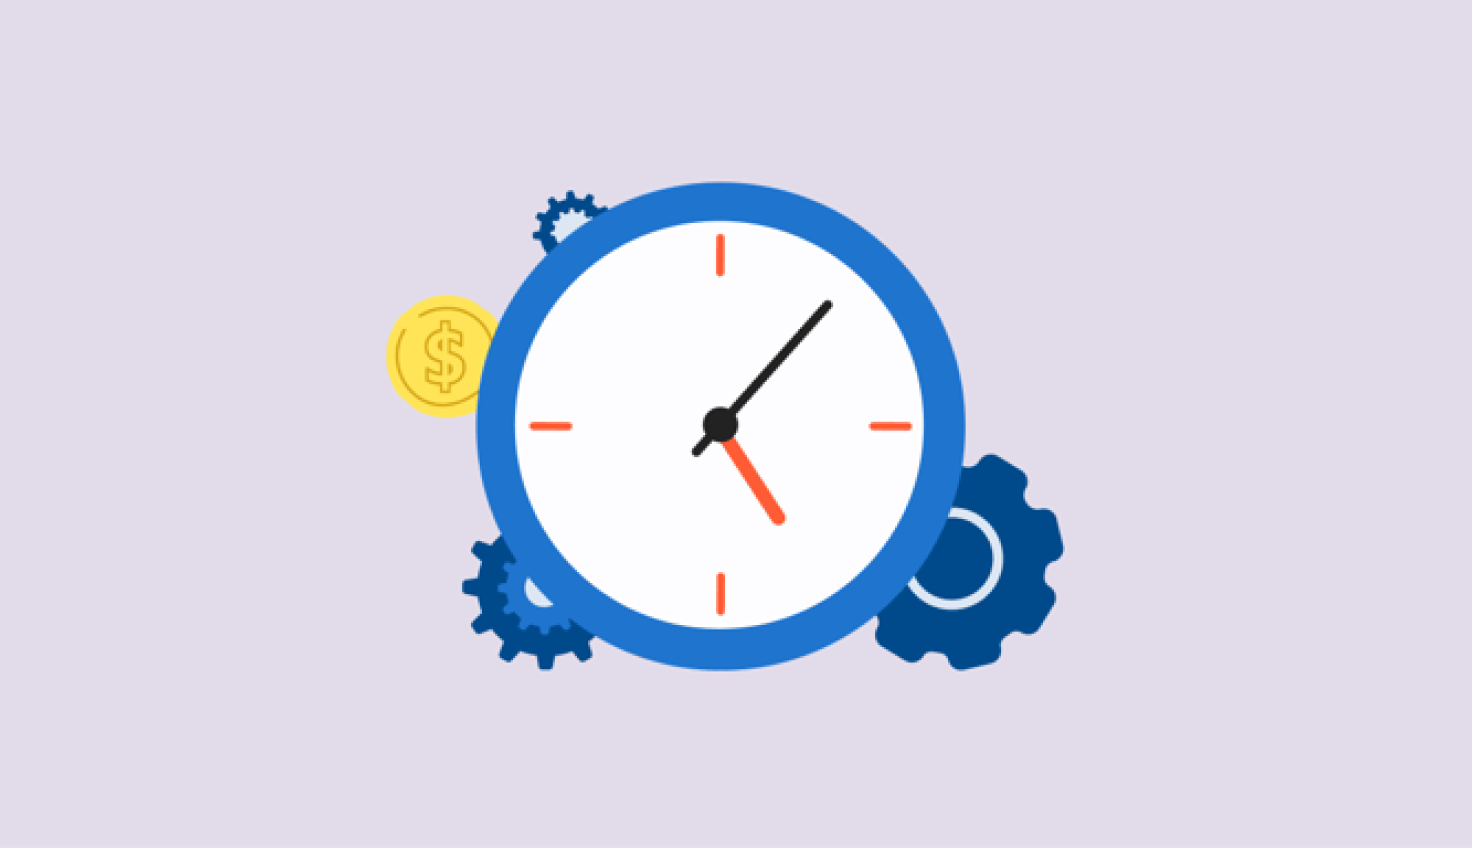 How to Get Employees to Submit Timesheets on Time